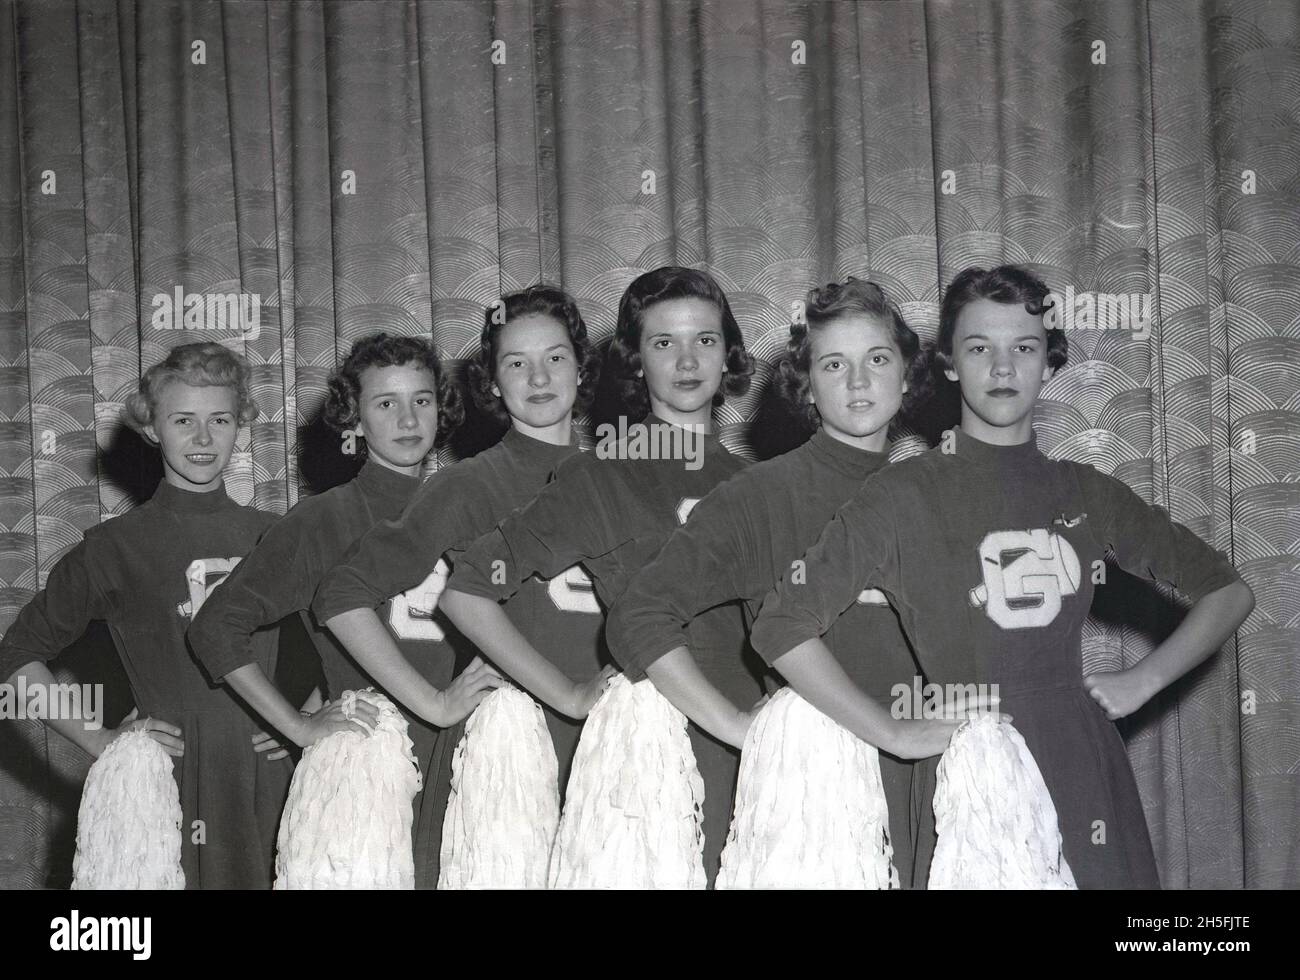 1950s, historical, against a curtain, six american girl cheerleaders in their uniforms and holding their pom-poms, standing hands on hips, in a line for a photo, USA. Cheerleaders have been a part of American team sports, both amateur and professional for decades, particularly in basketball and American football, where girls wear special outfits and wave their pom-poms as they cheer and support their teams. In this era, the first letter of the high school the cheerleaders attended would often be embroidered onto the outfits - as we see here the letter G - in the middle of a megaphone shape. Stock Photo